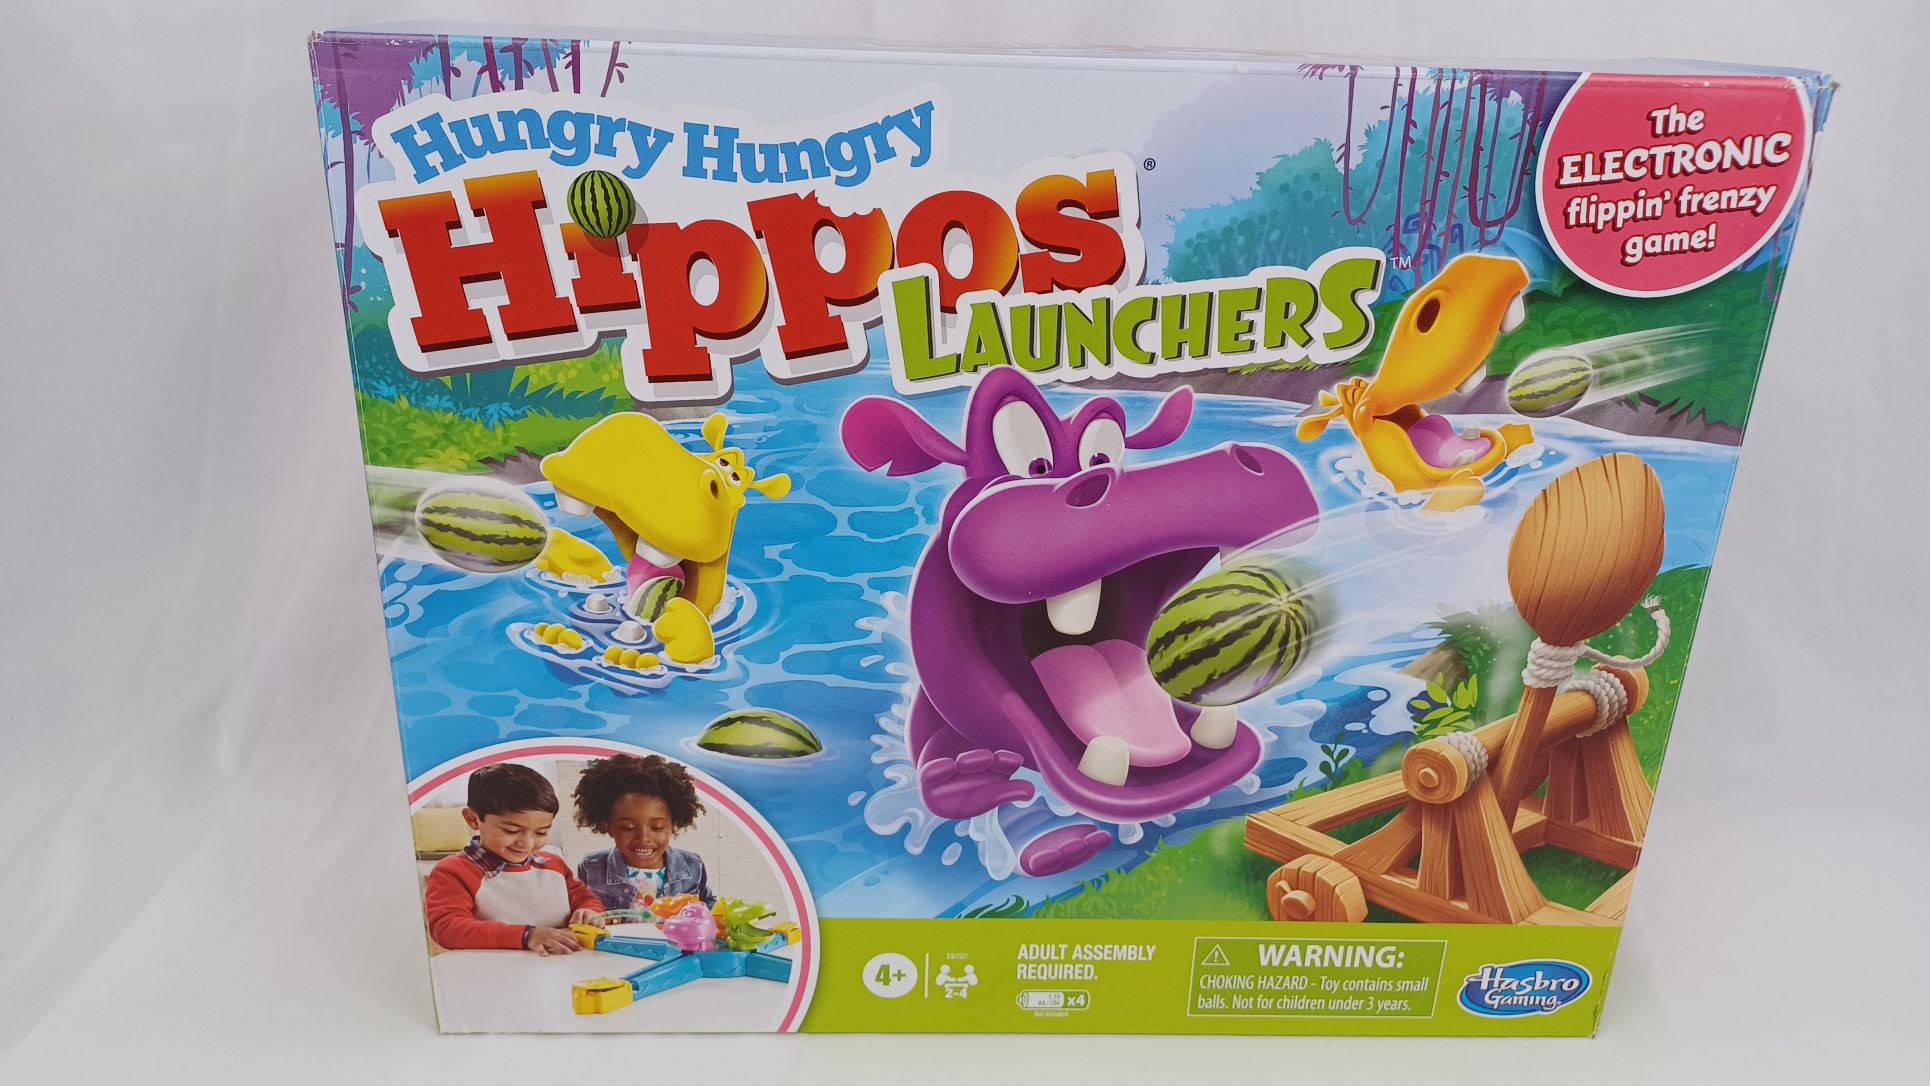 Hungry Hungry Hippos Launchers Box